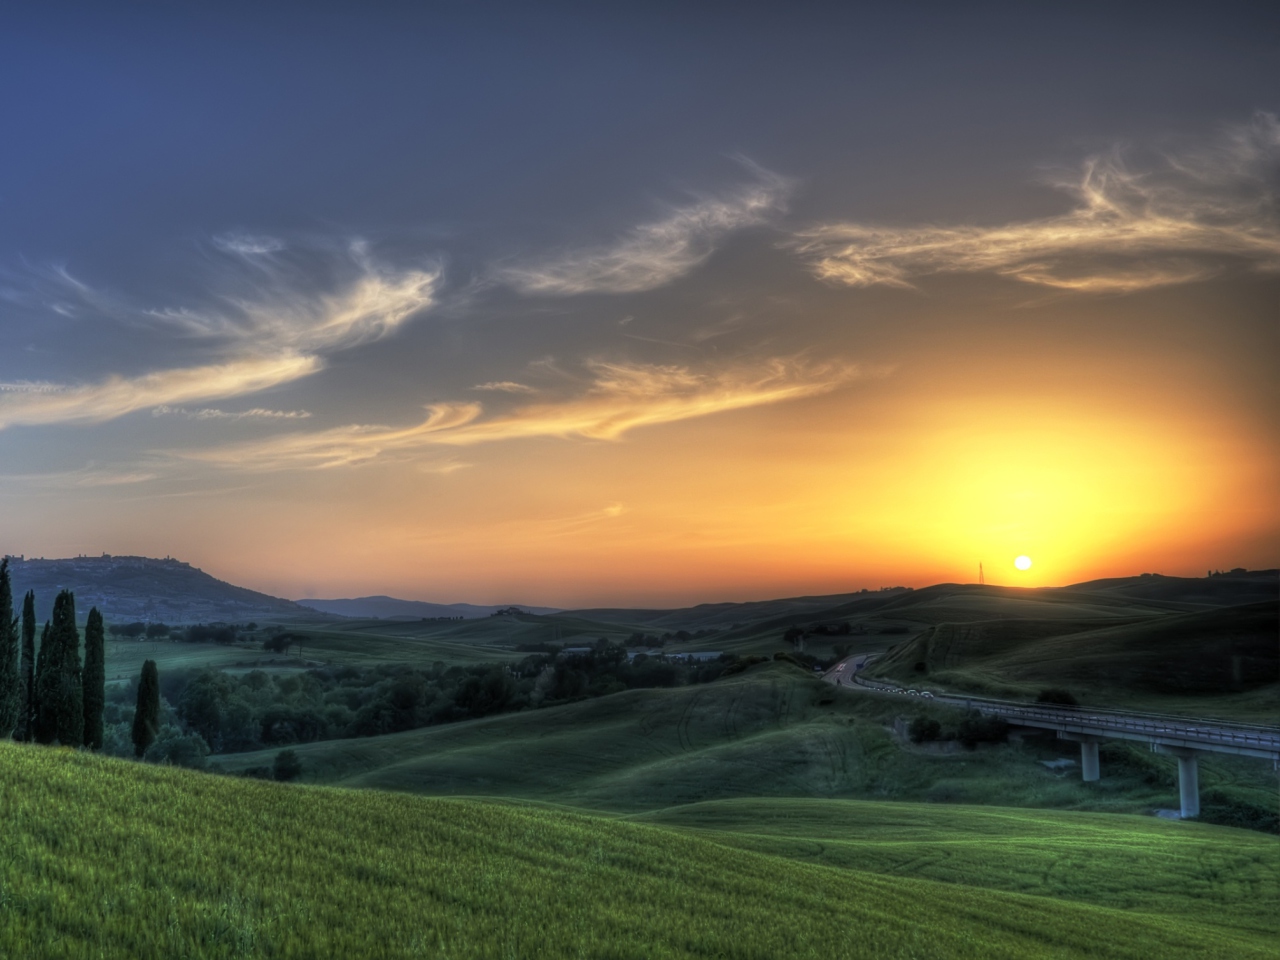 Sunset In Tuscany wallpaper 1280x960